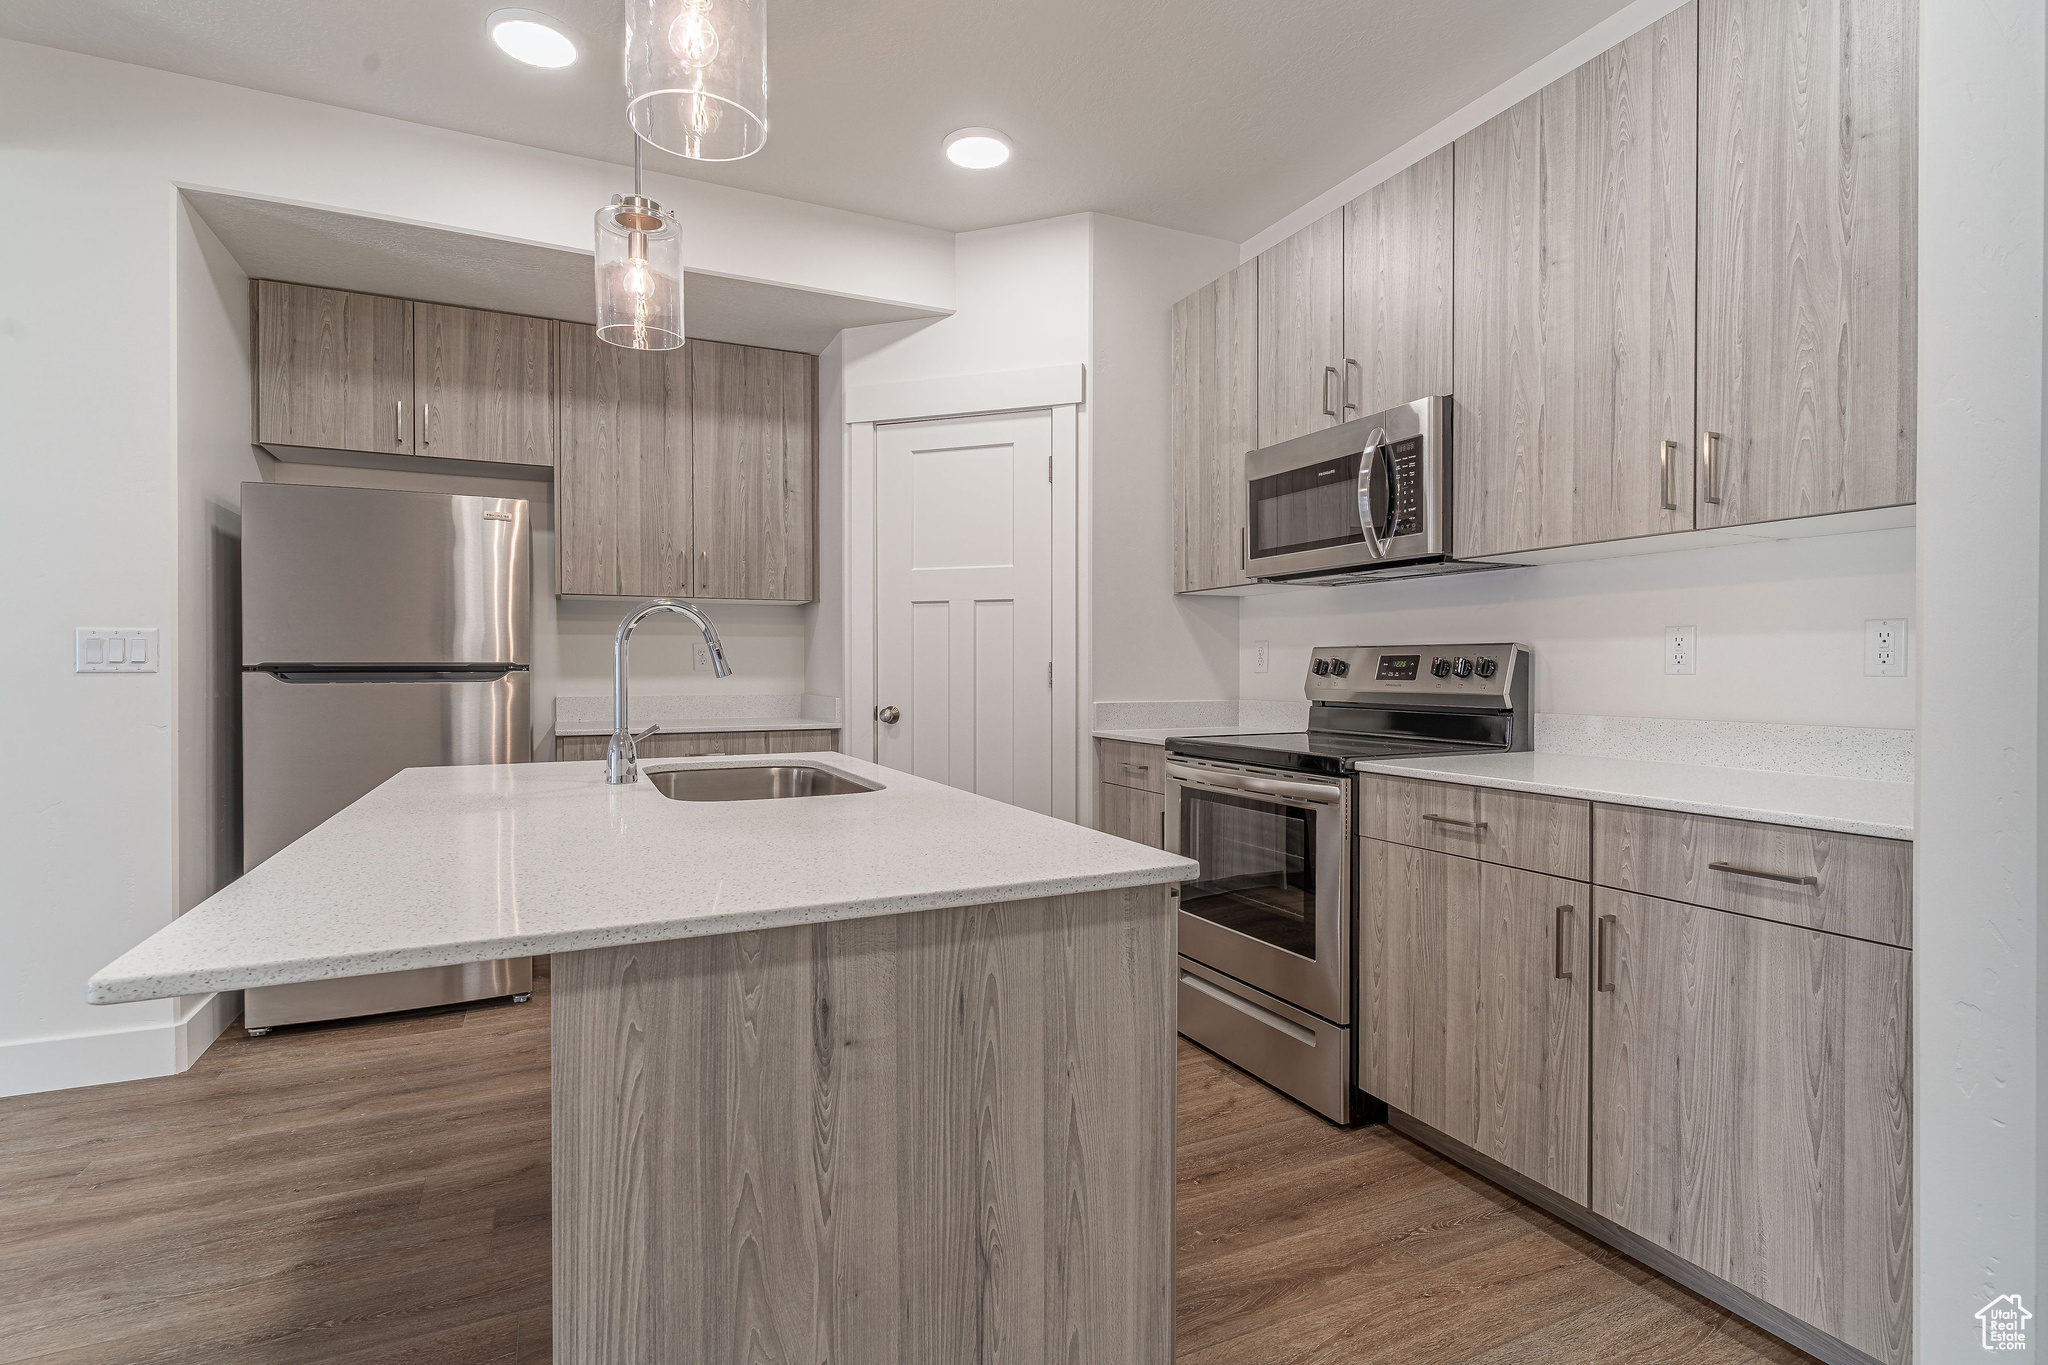 Kitchen featuring dark hardwood / wood-style flooring, decorative light fixtures, stainless steel appliances, sink, and a center island with sink